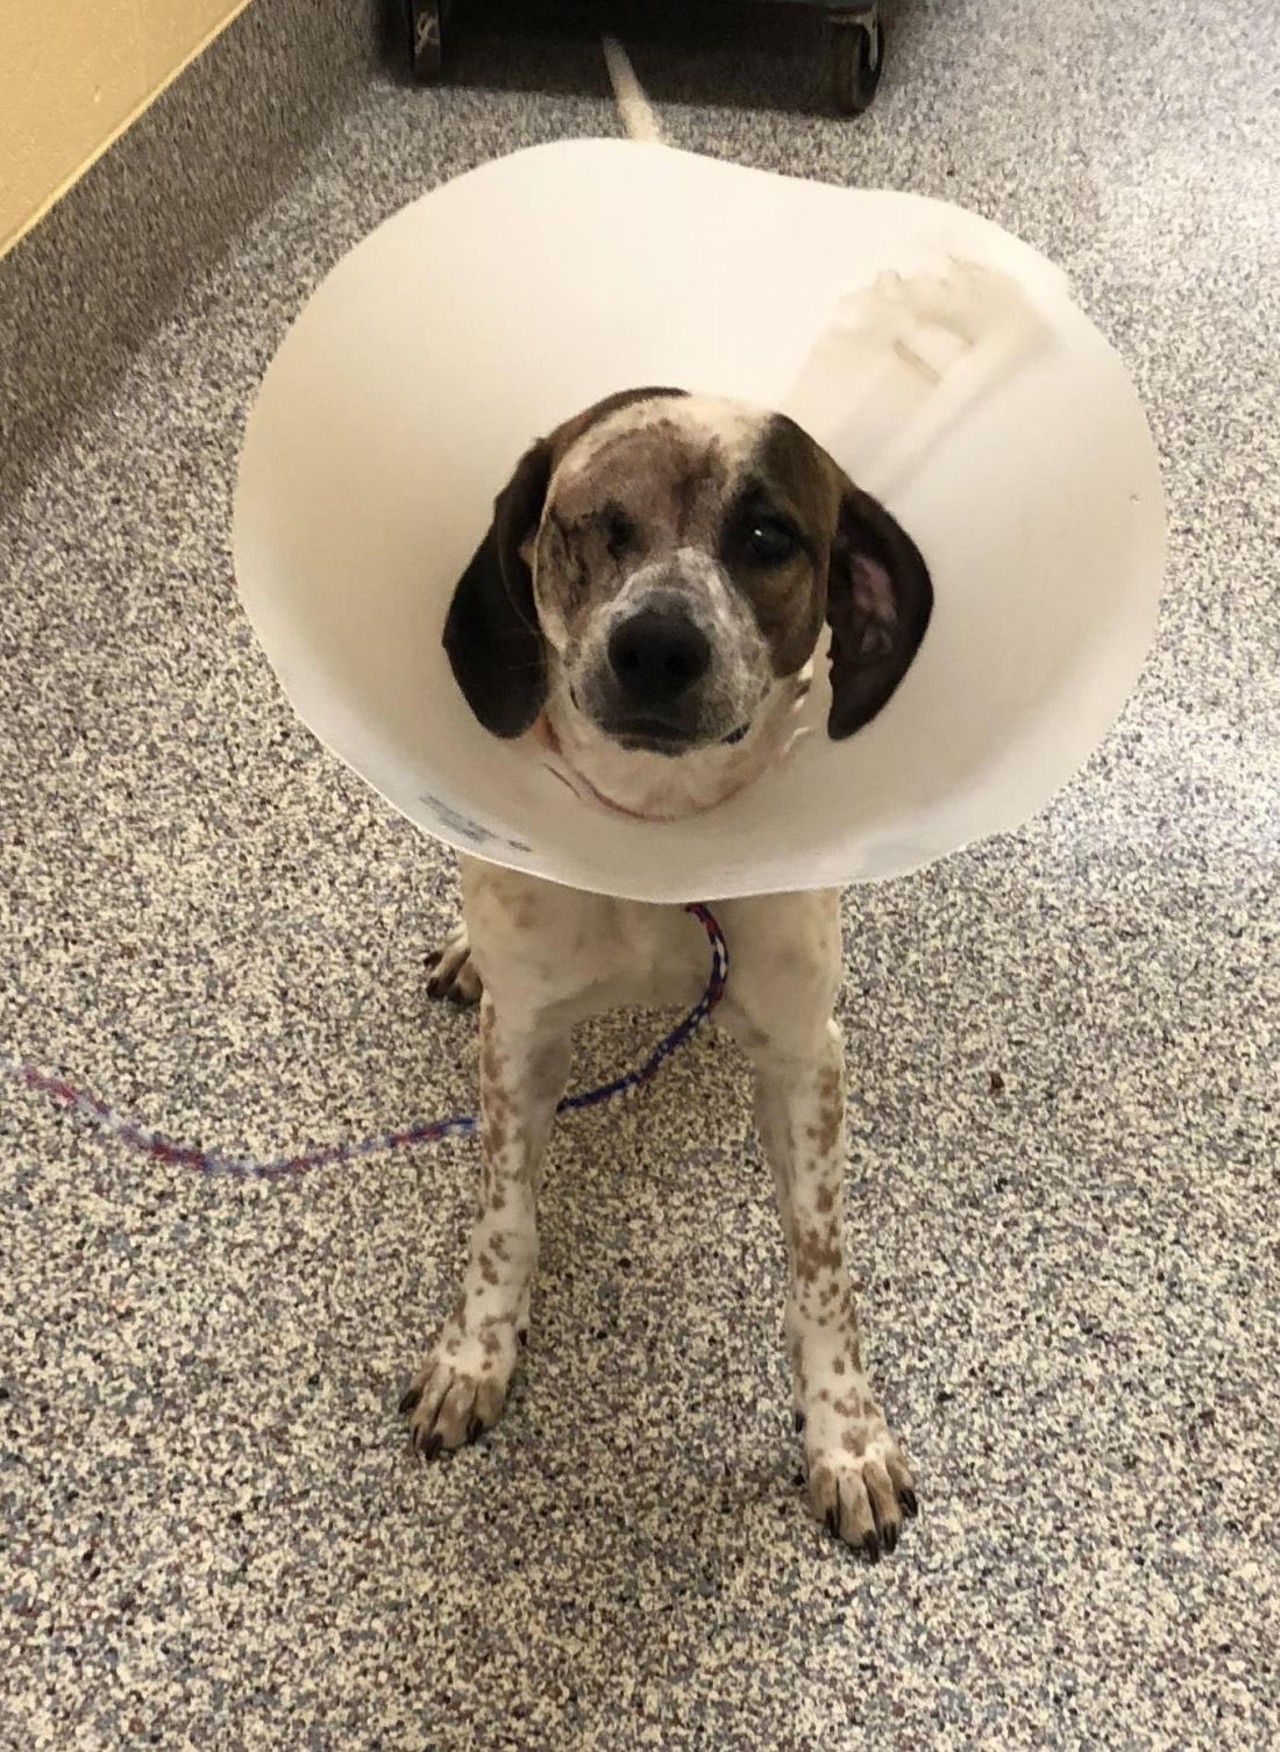 NAME: Freckles
GENDER: Female
BREED: Hound
AGE: 1 year
WEIGHT: 36 pounds
SPECIAL CONSIDERATIONS: Partially blind
REASON I CAME TO MHS: Agency transfer
LOCATION: Berman Center for Animal Care in Westland
ID NUMBER: 864216